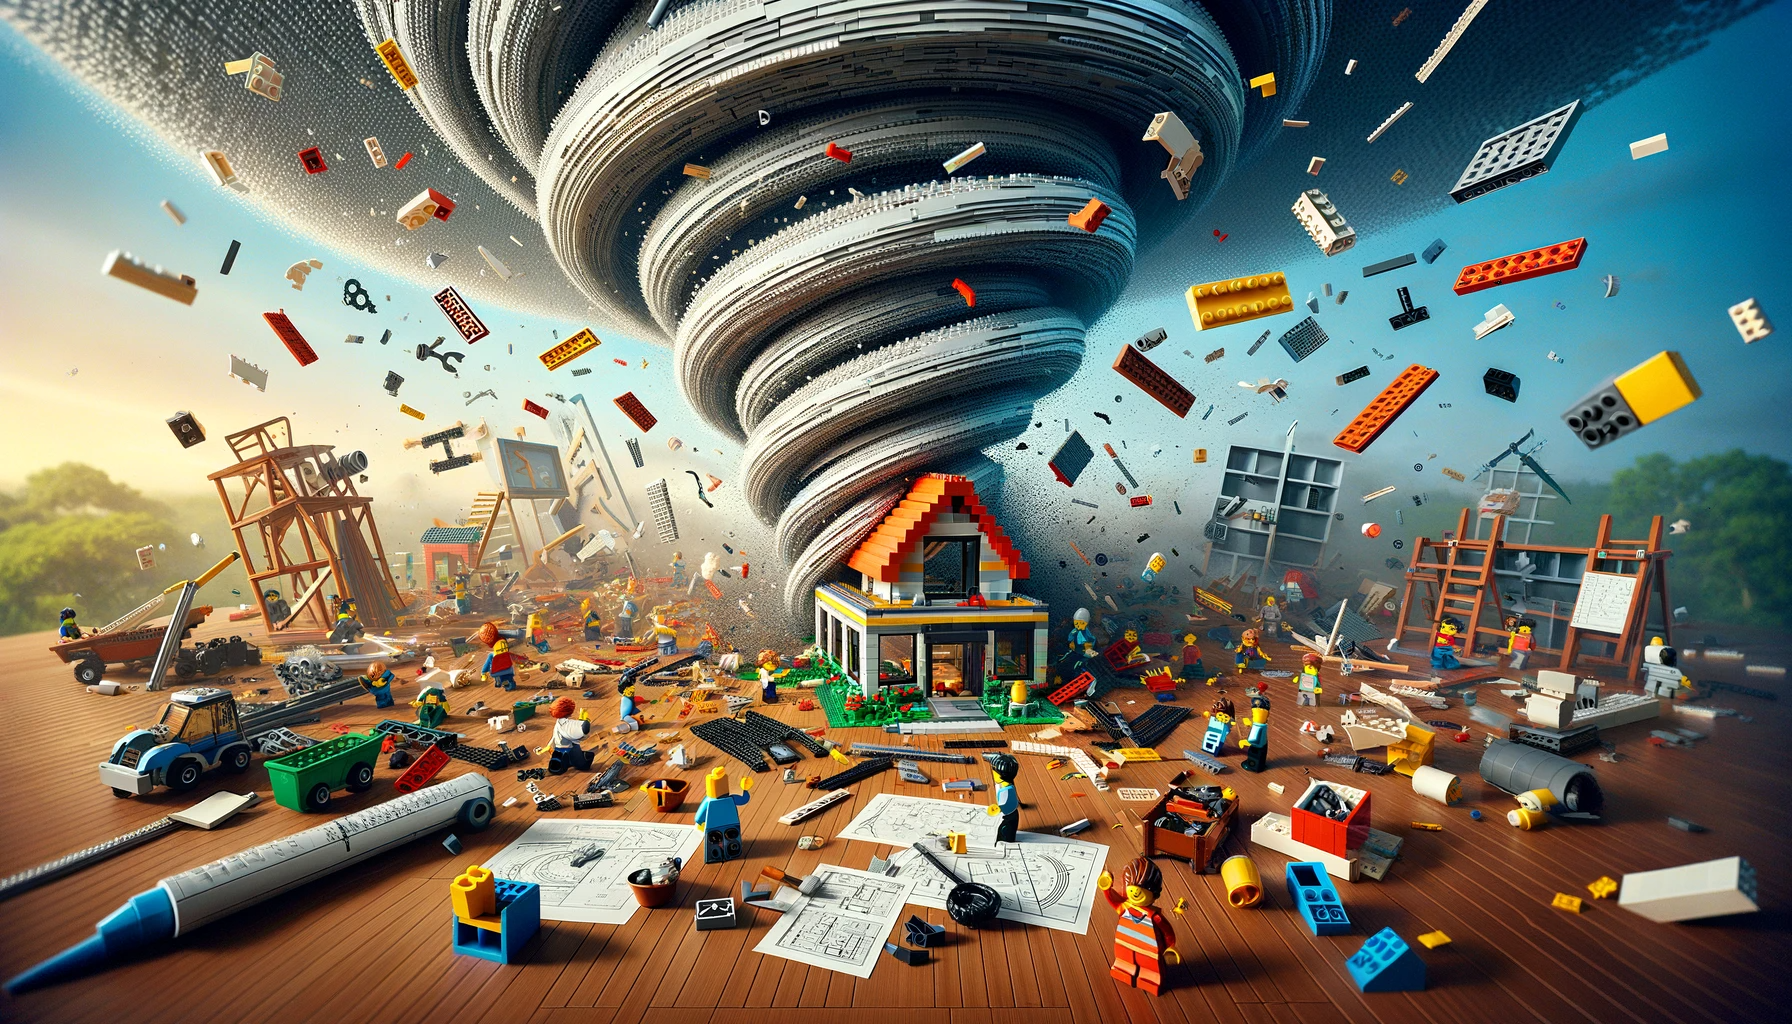 Lego-style landscape image illustrating the concept of "A Simple Project Gone Wild"